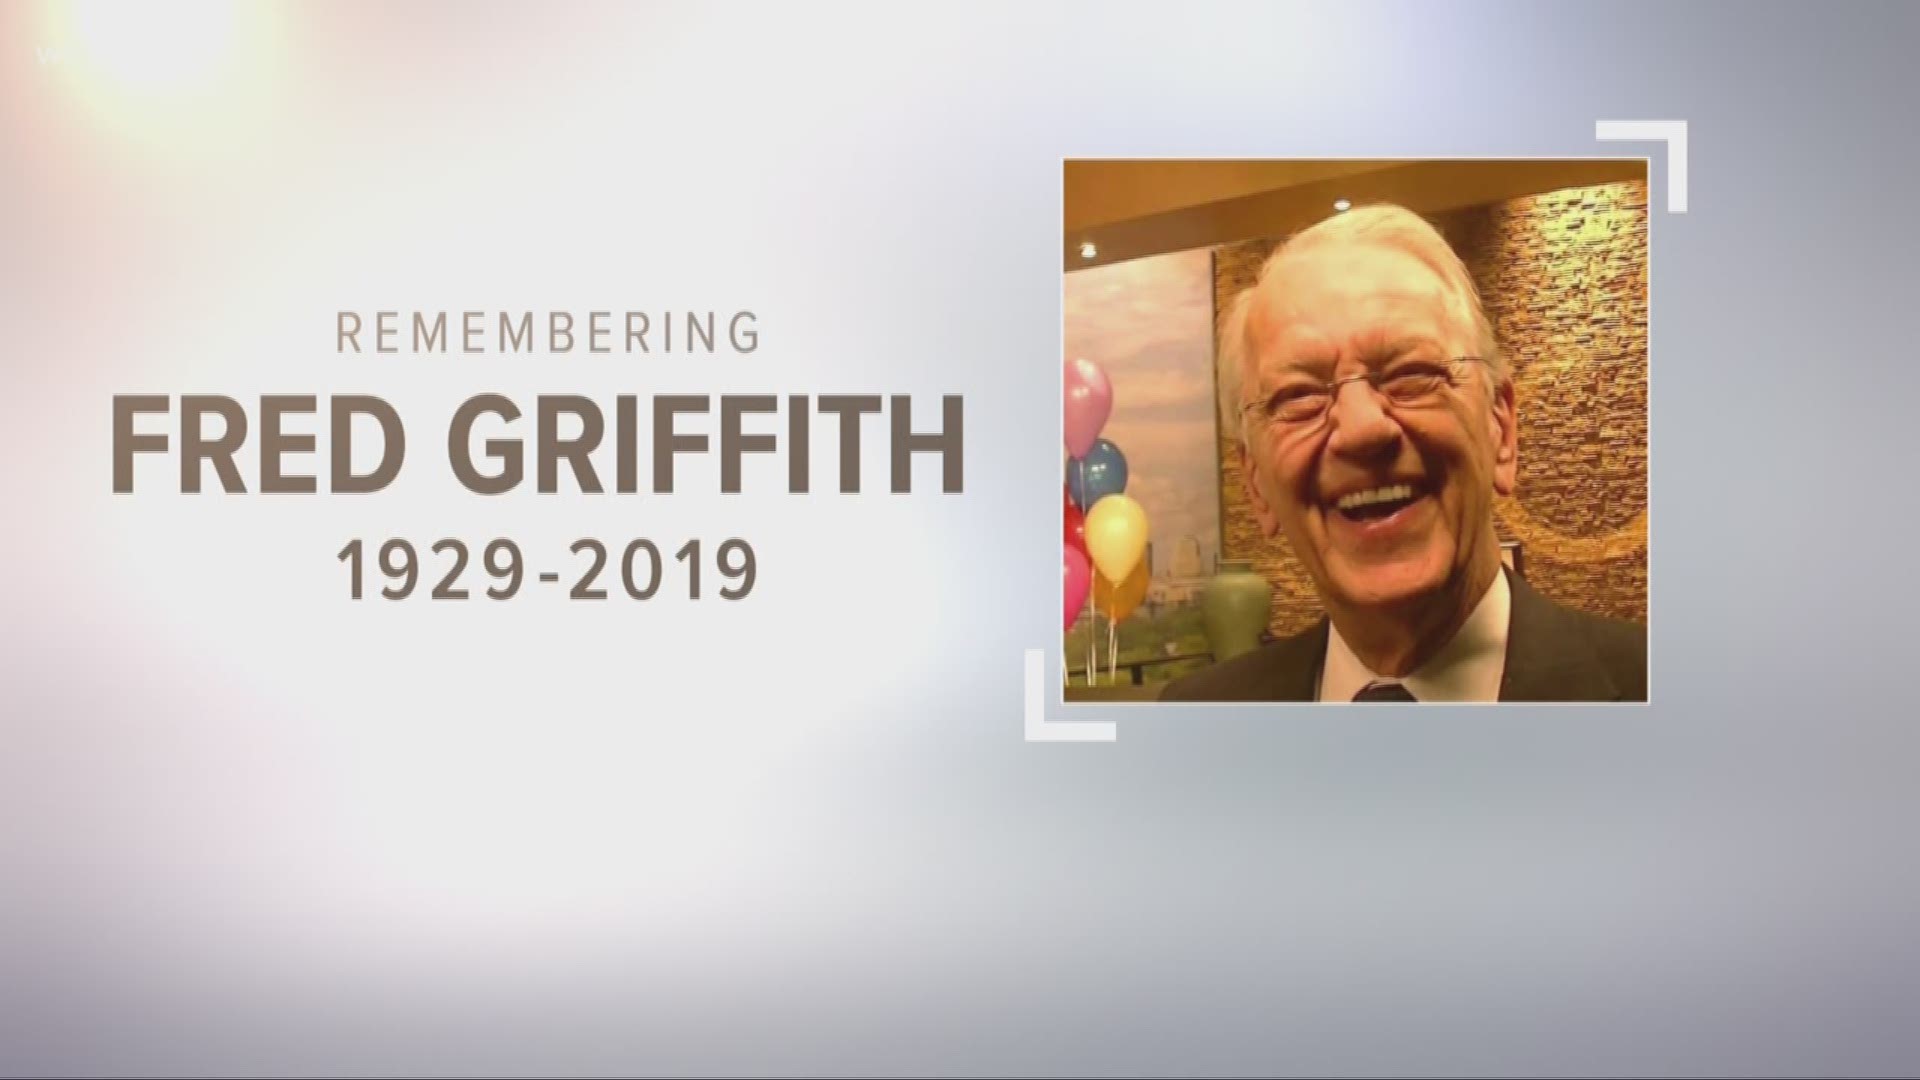 Griffith spent more than 50 years on Cleveland's airwaves, including 12 here at WKYC.